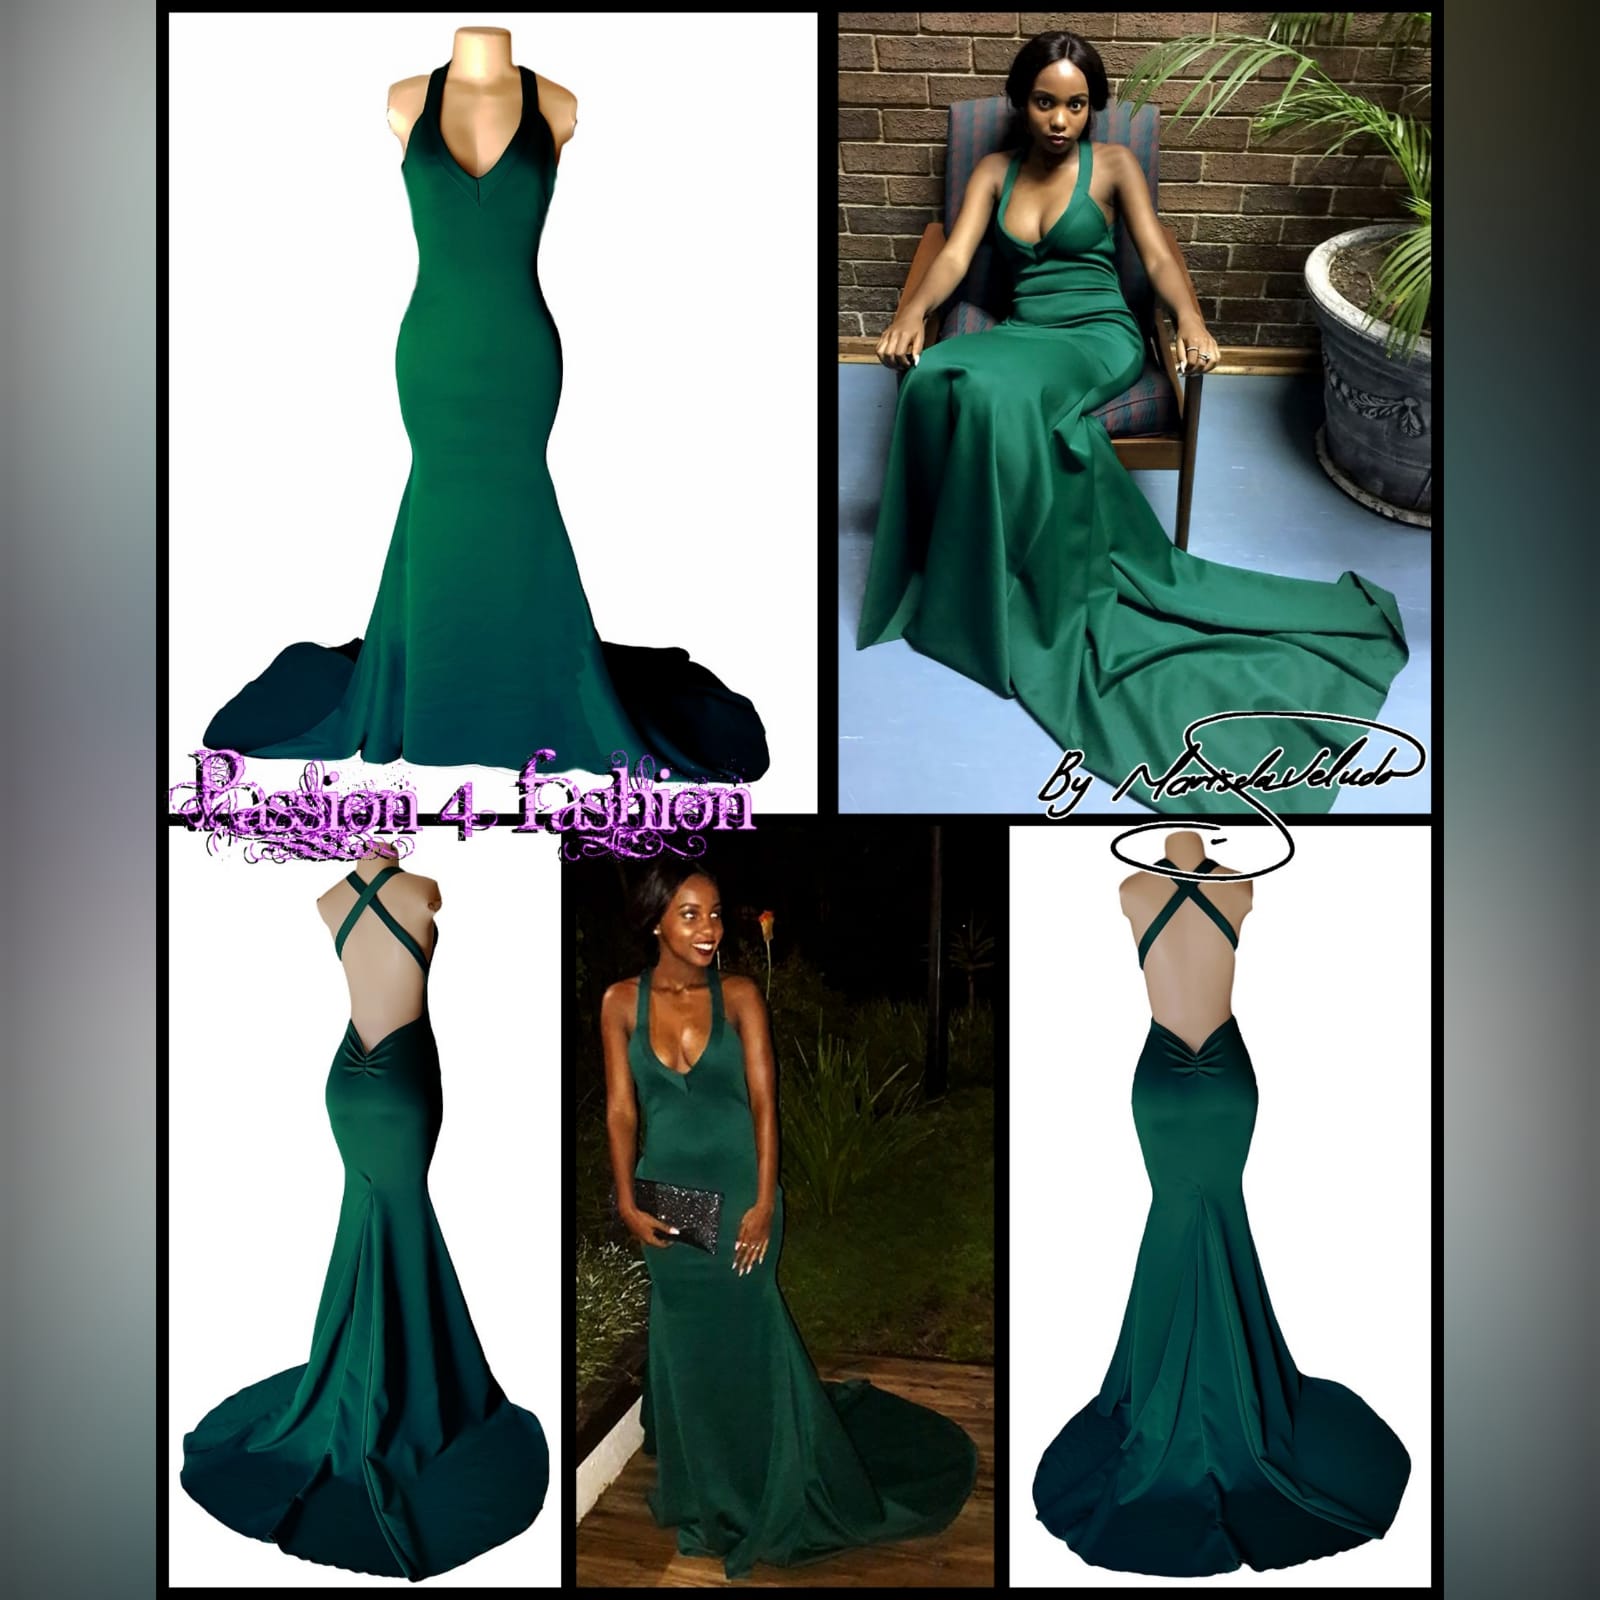 Emerald green soft mermaid matric farewell dress 7 emerald green soft mermaid matric farewell dress, with a v neckline, low open v back with pleated detail and crossed straps, with a train.